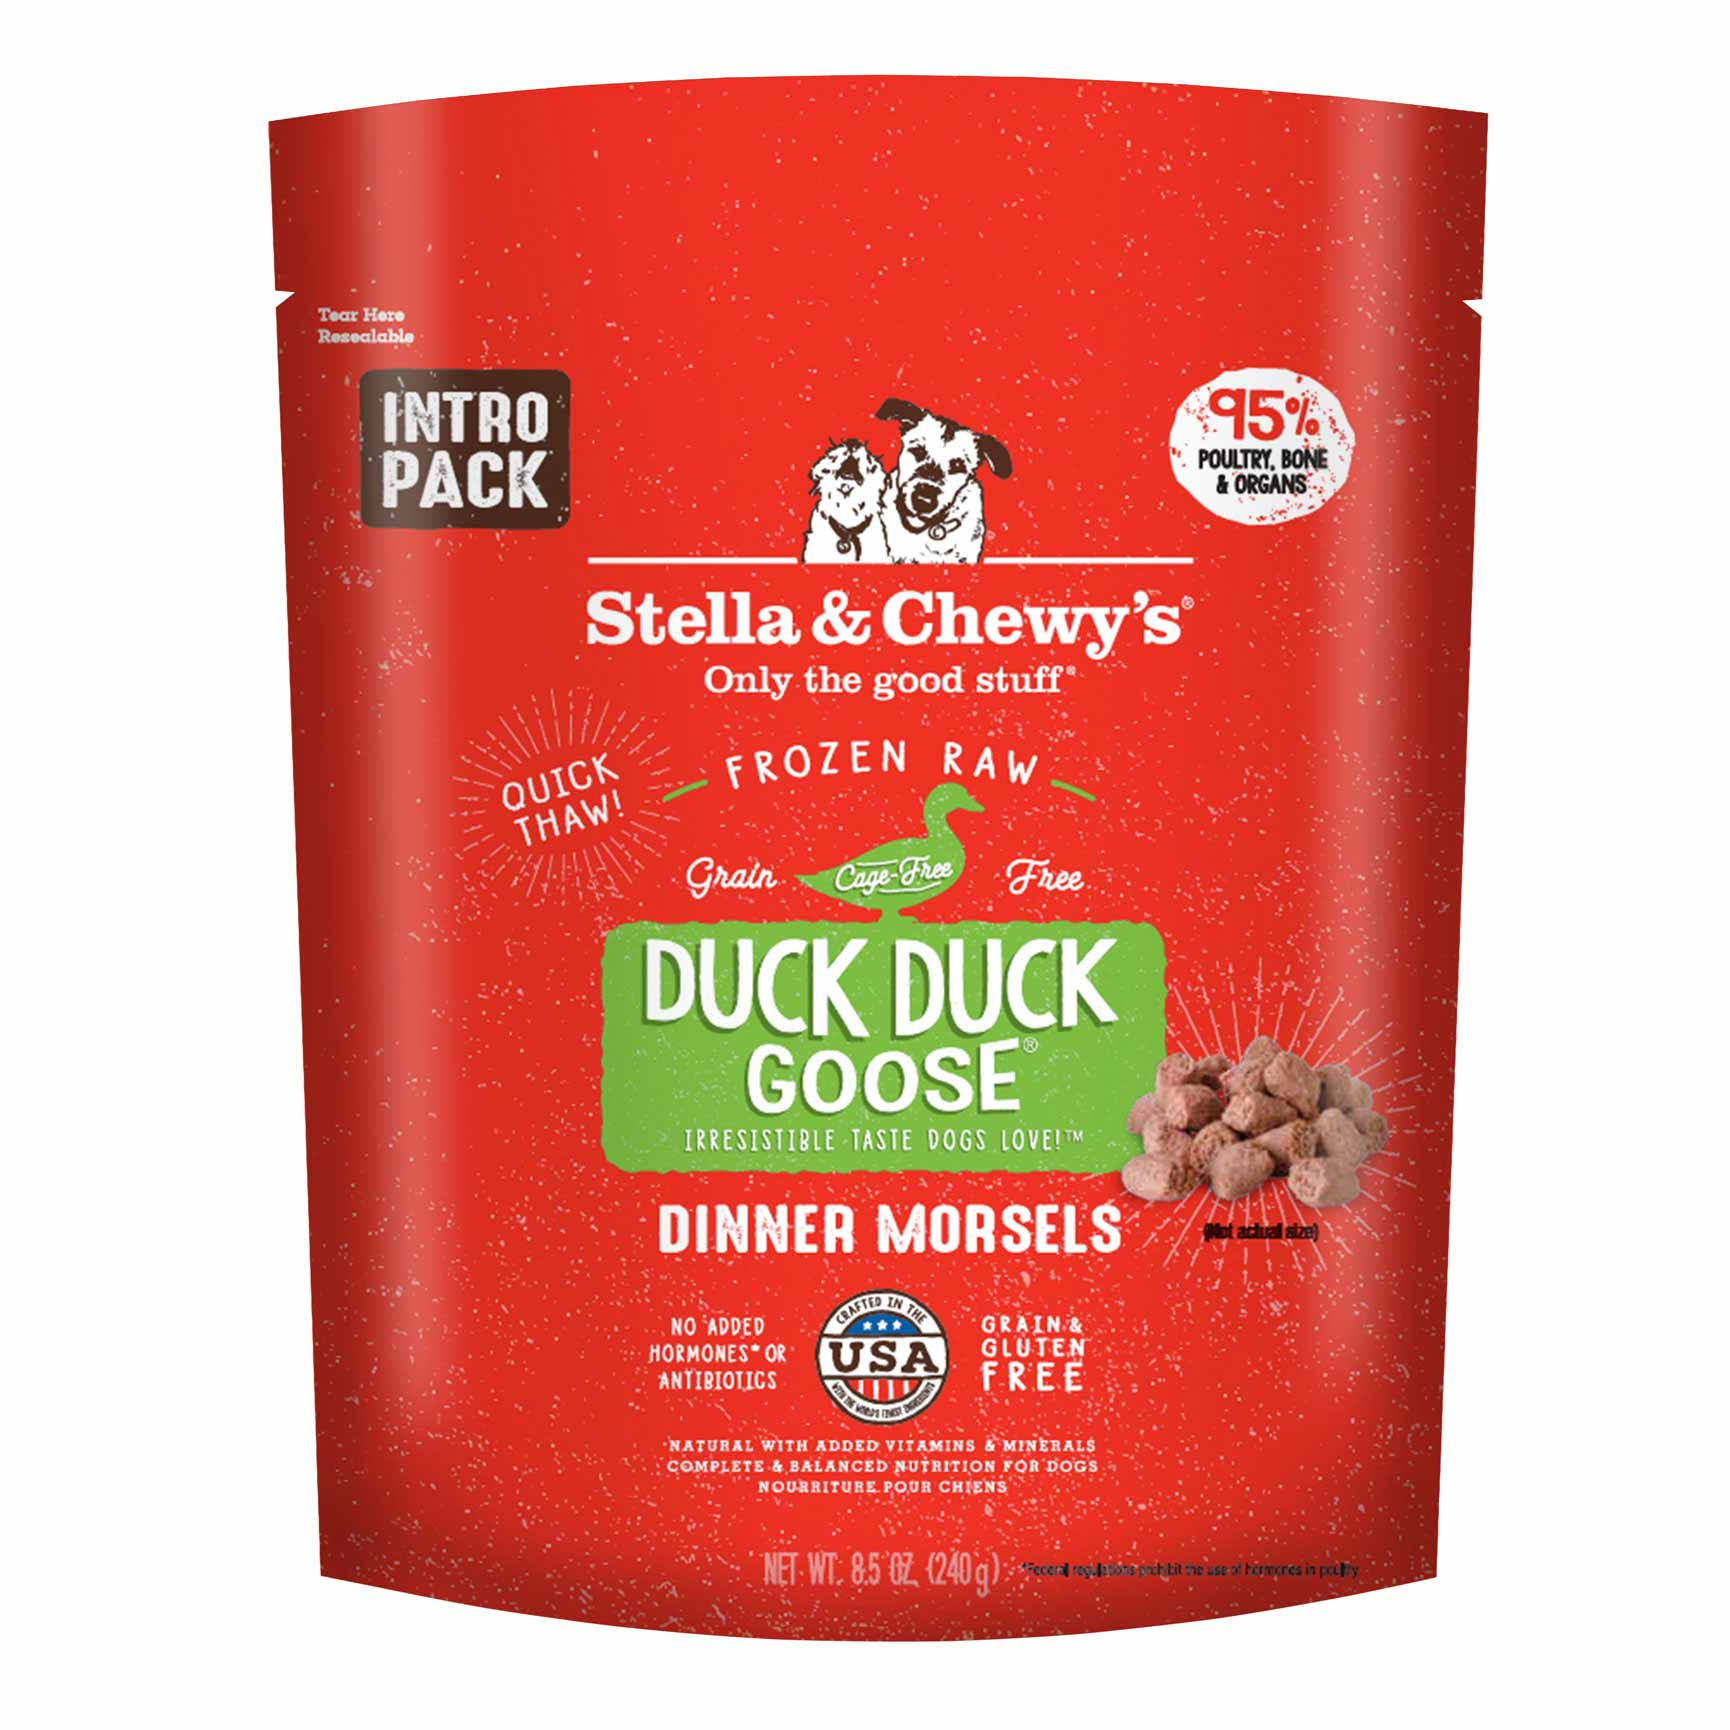 Stella & Chewy's Dog Food - Duck Duck Goose, 8.5oz